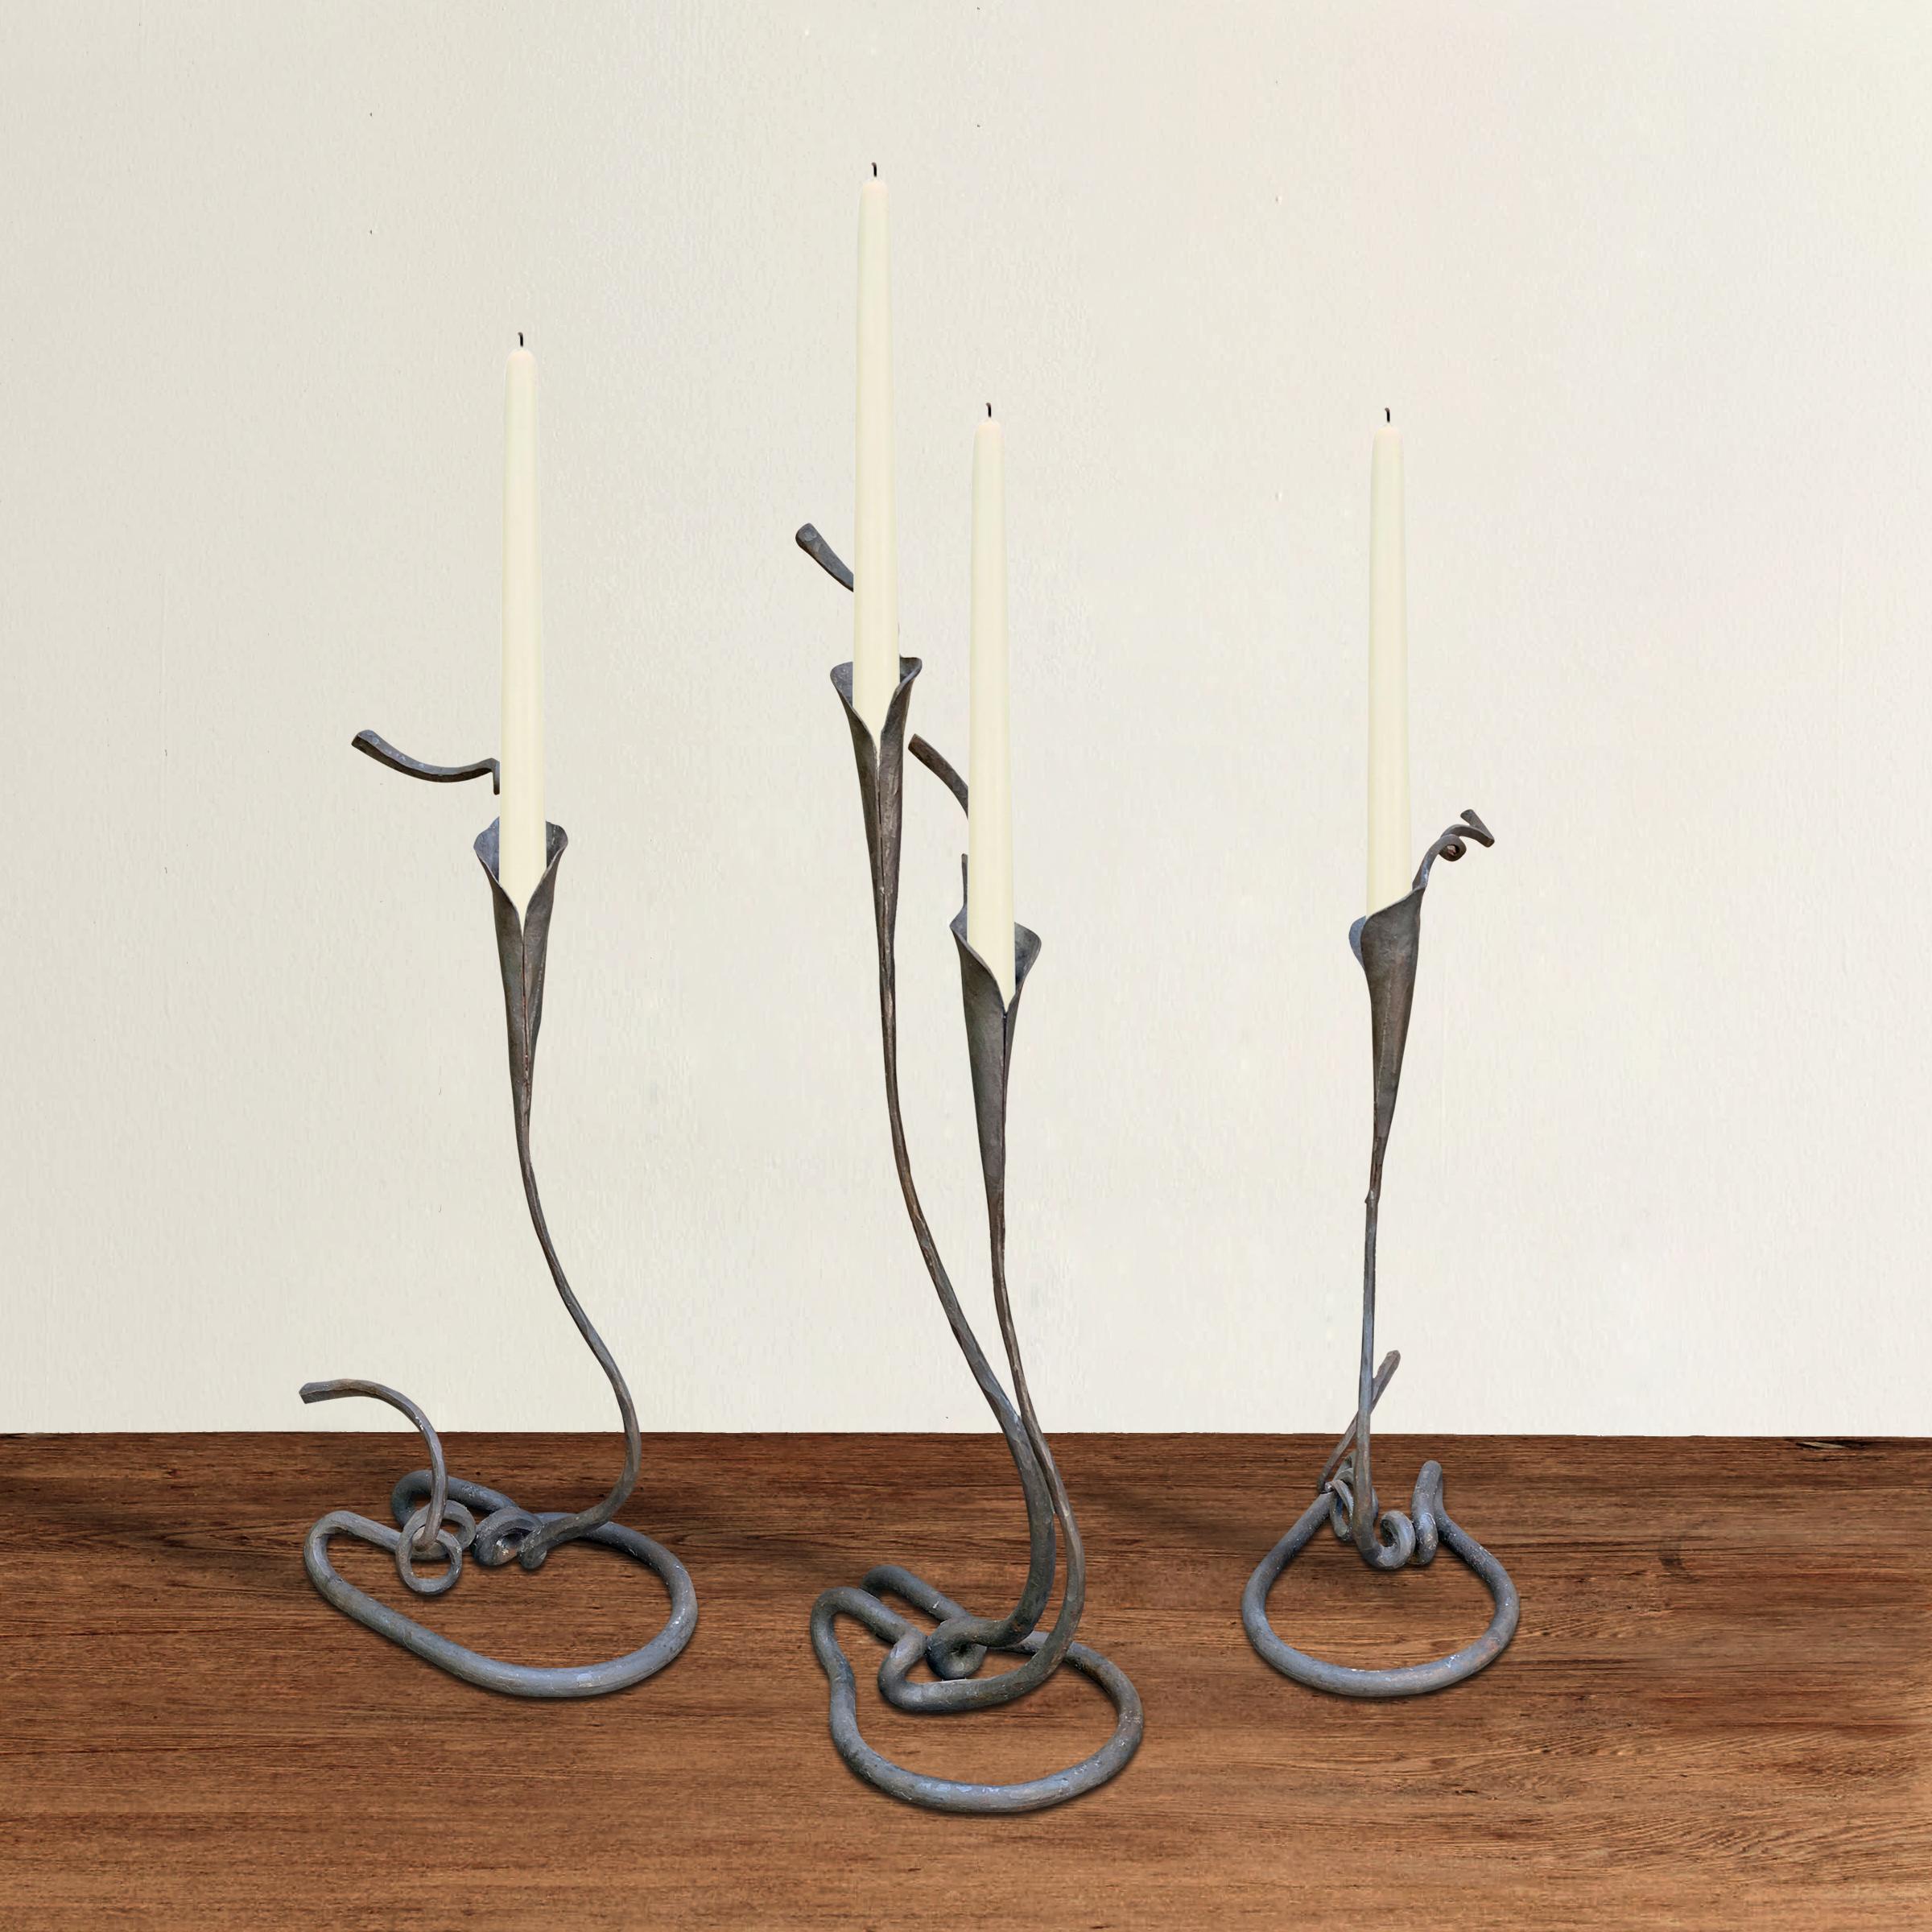 A beautiful set of three handwrought iron calla lily candlesticks with two single and one double flowers. Each has a wonderfully twisted foot and tendrils adding to the naturalistic design.